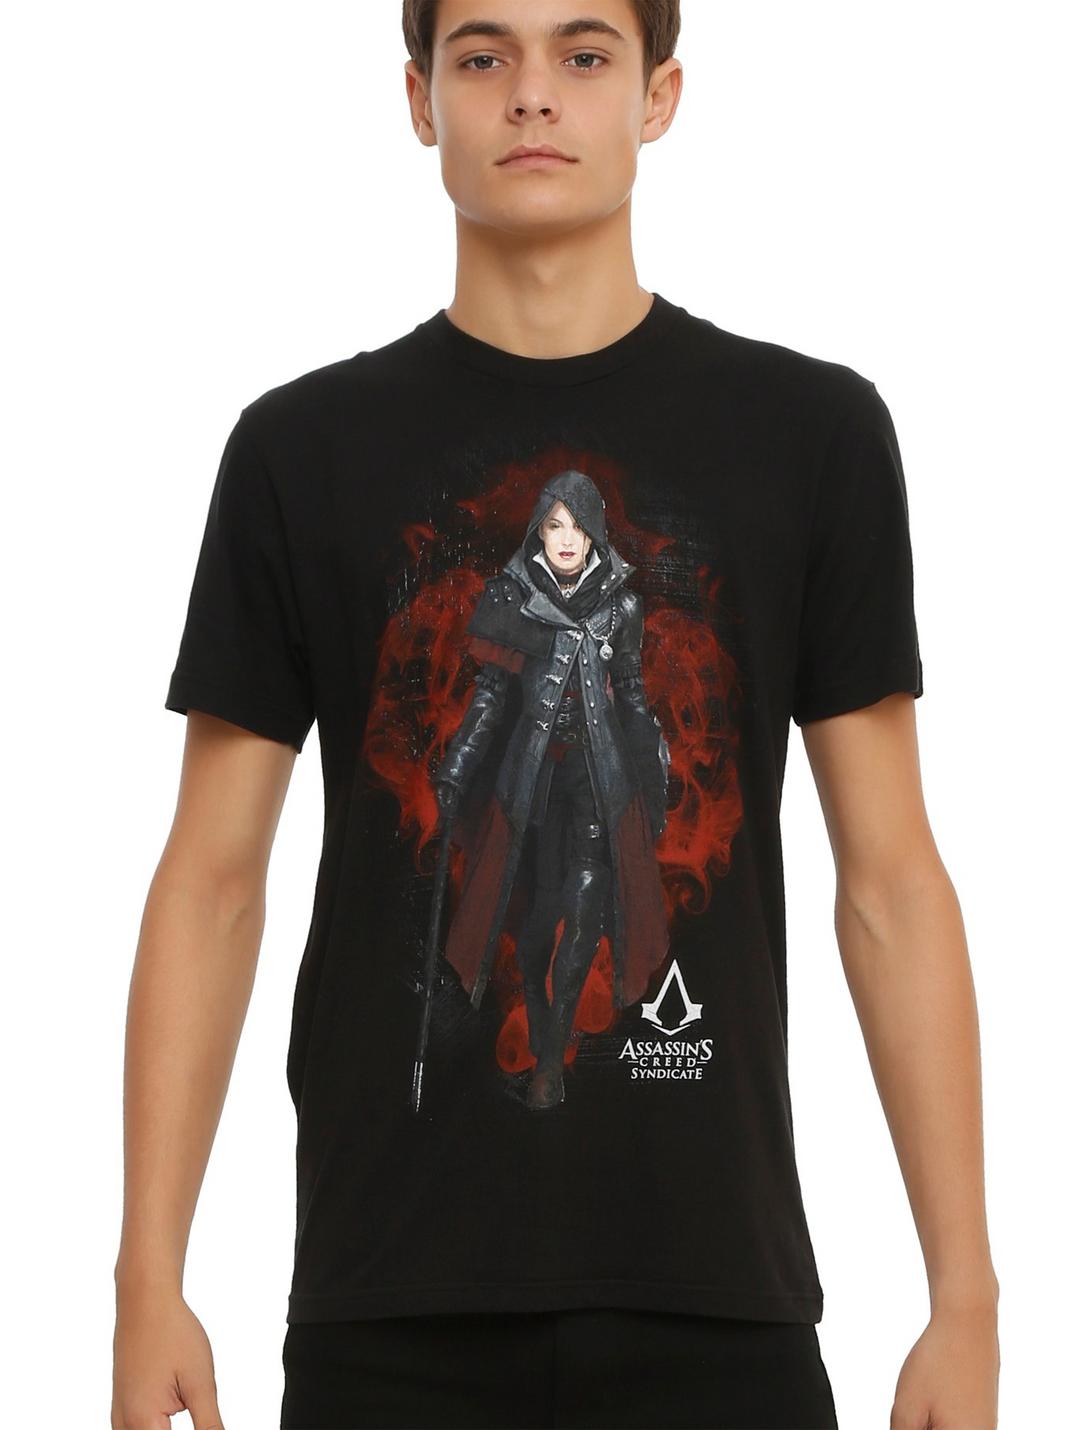 Assassin's Creed Syndicate Evie T-Shirt, BLACK, hi-res